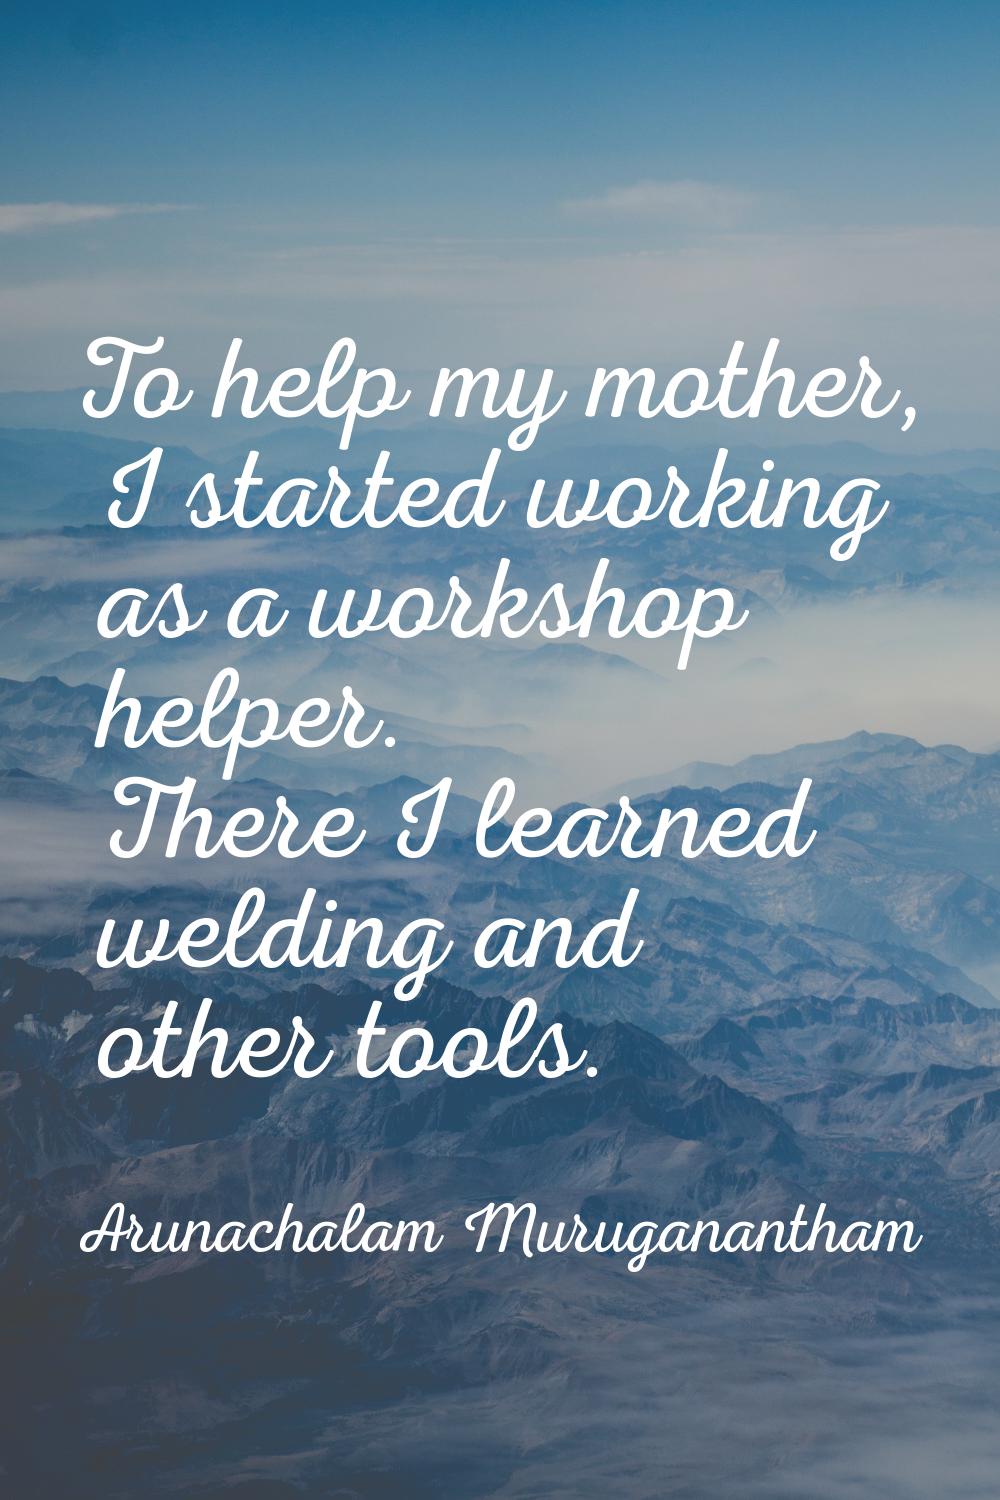 To help my mother, I started working as a workshop helper. There I learned welding and other tools.